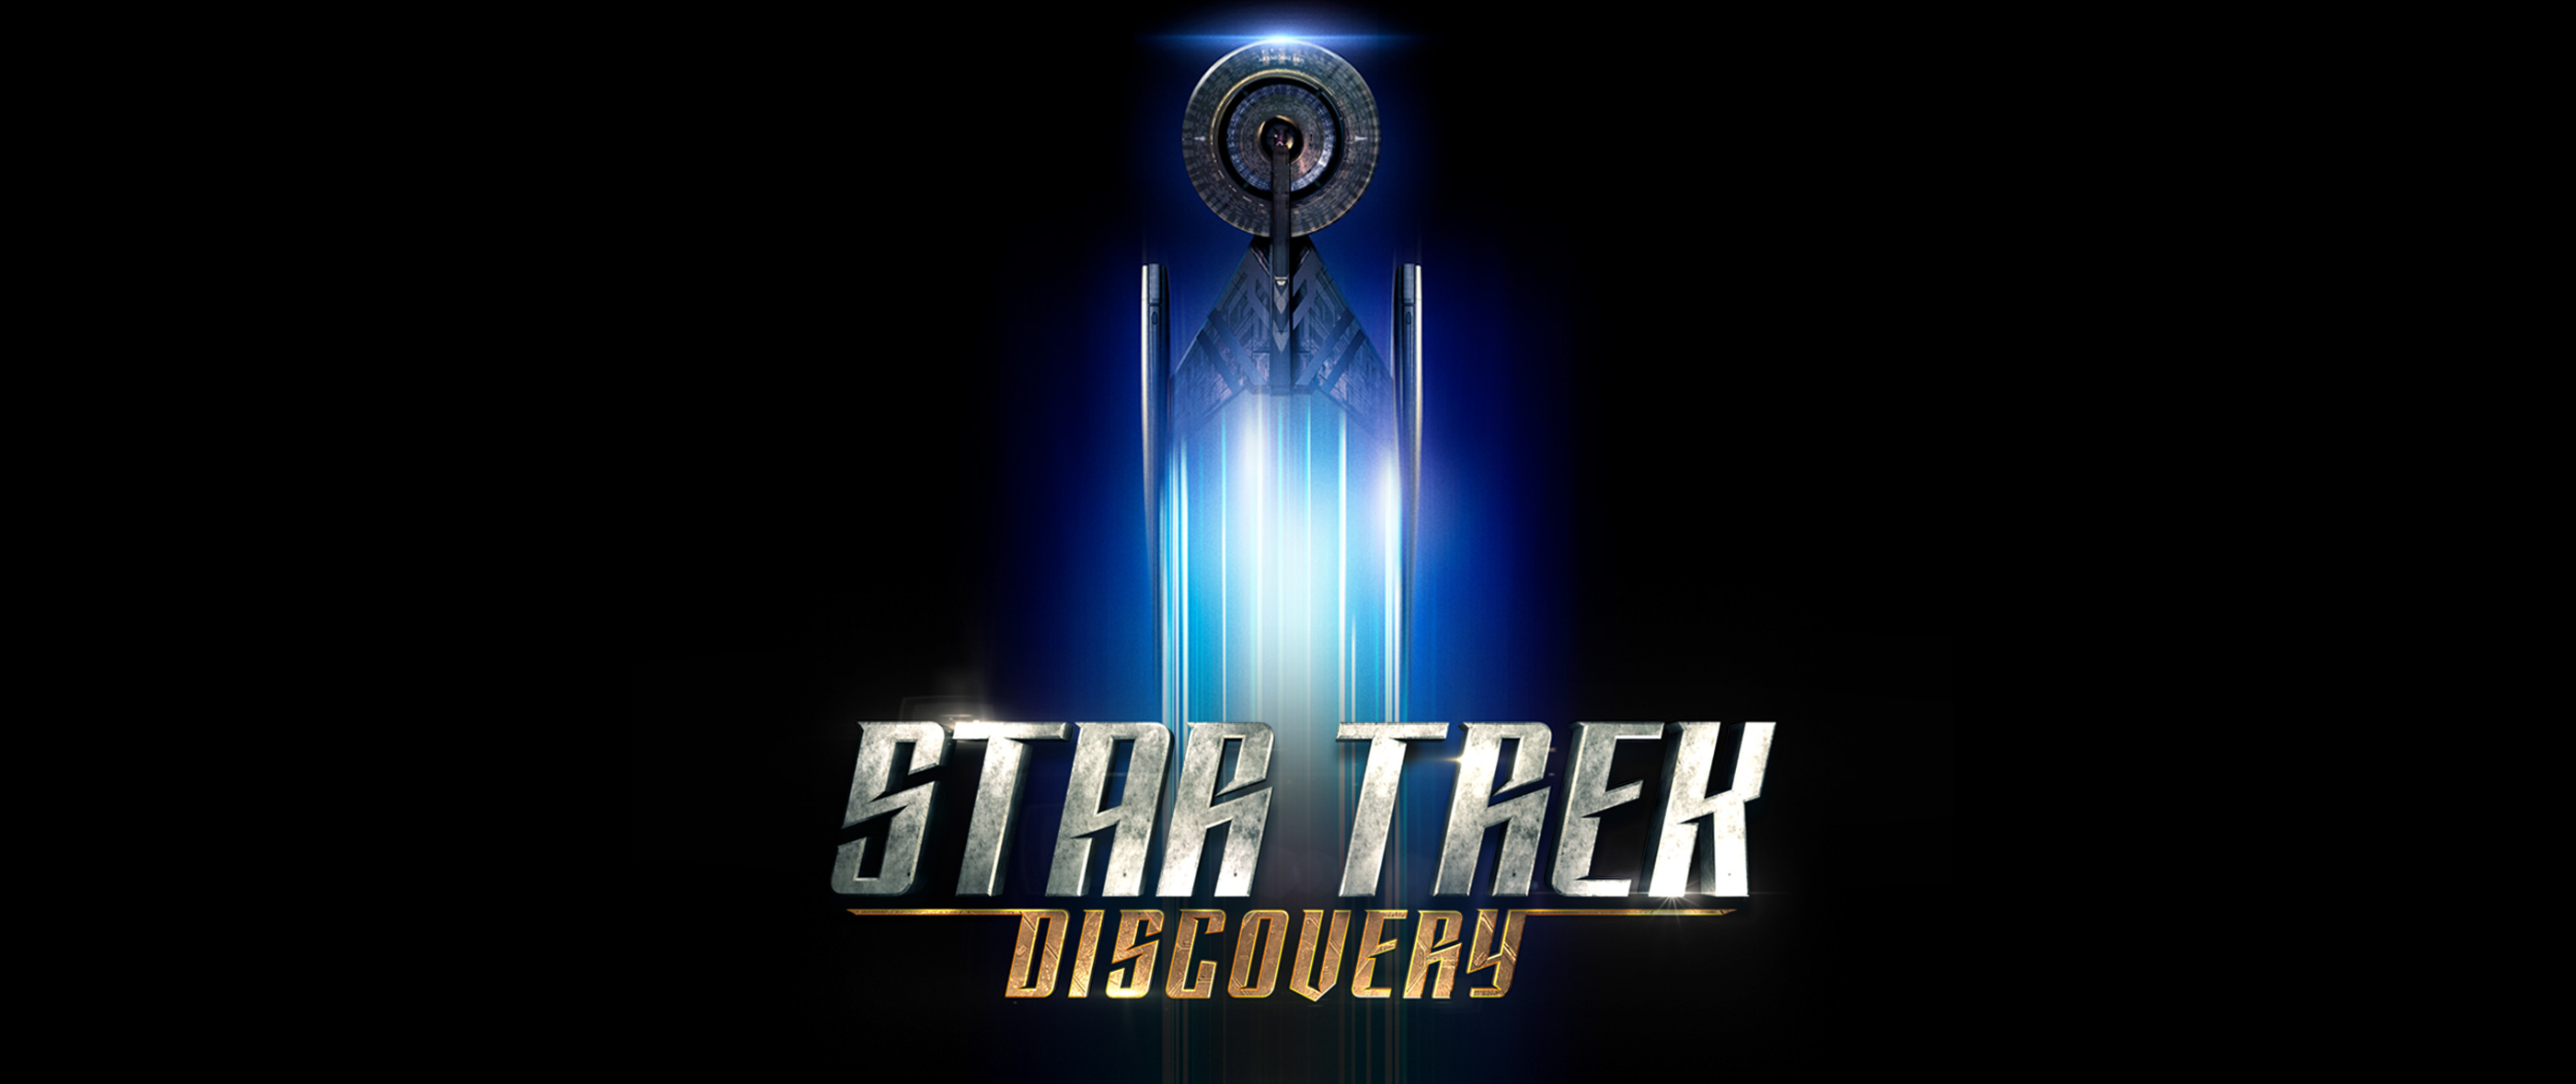 HD desktop wallpaper of Star Trek: Discovery, featuring series logo with a starship silhouette and light trails on a dark background.